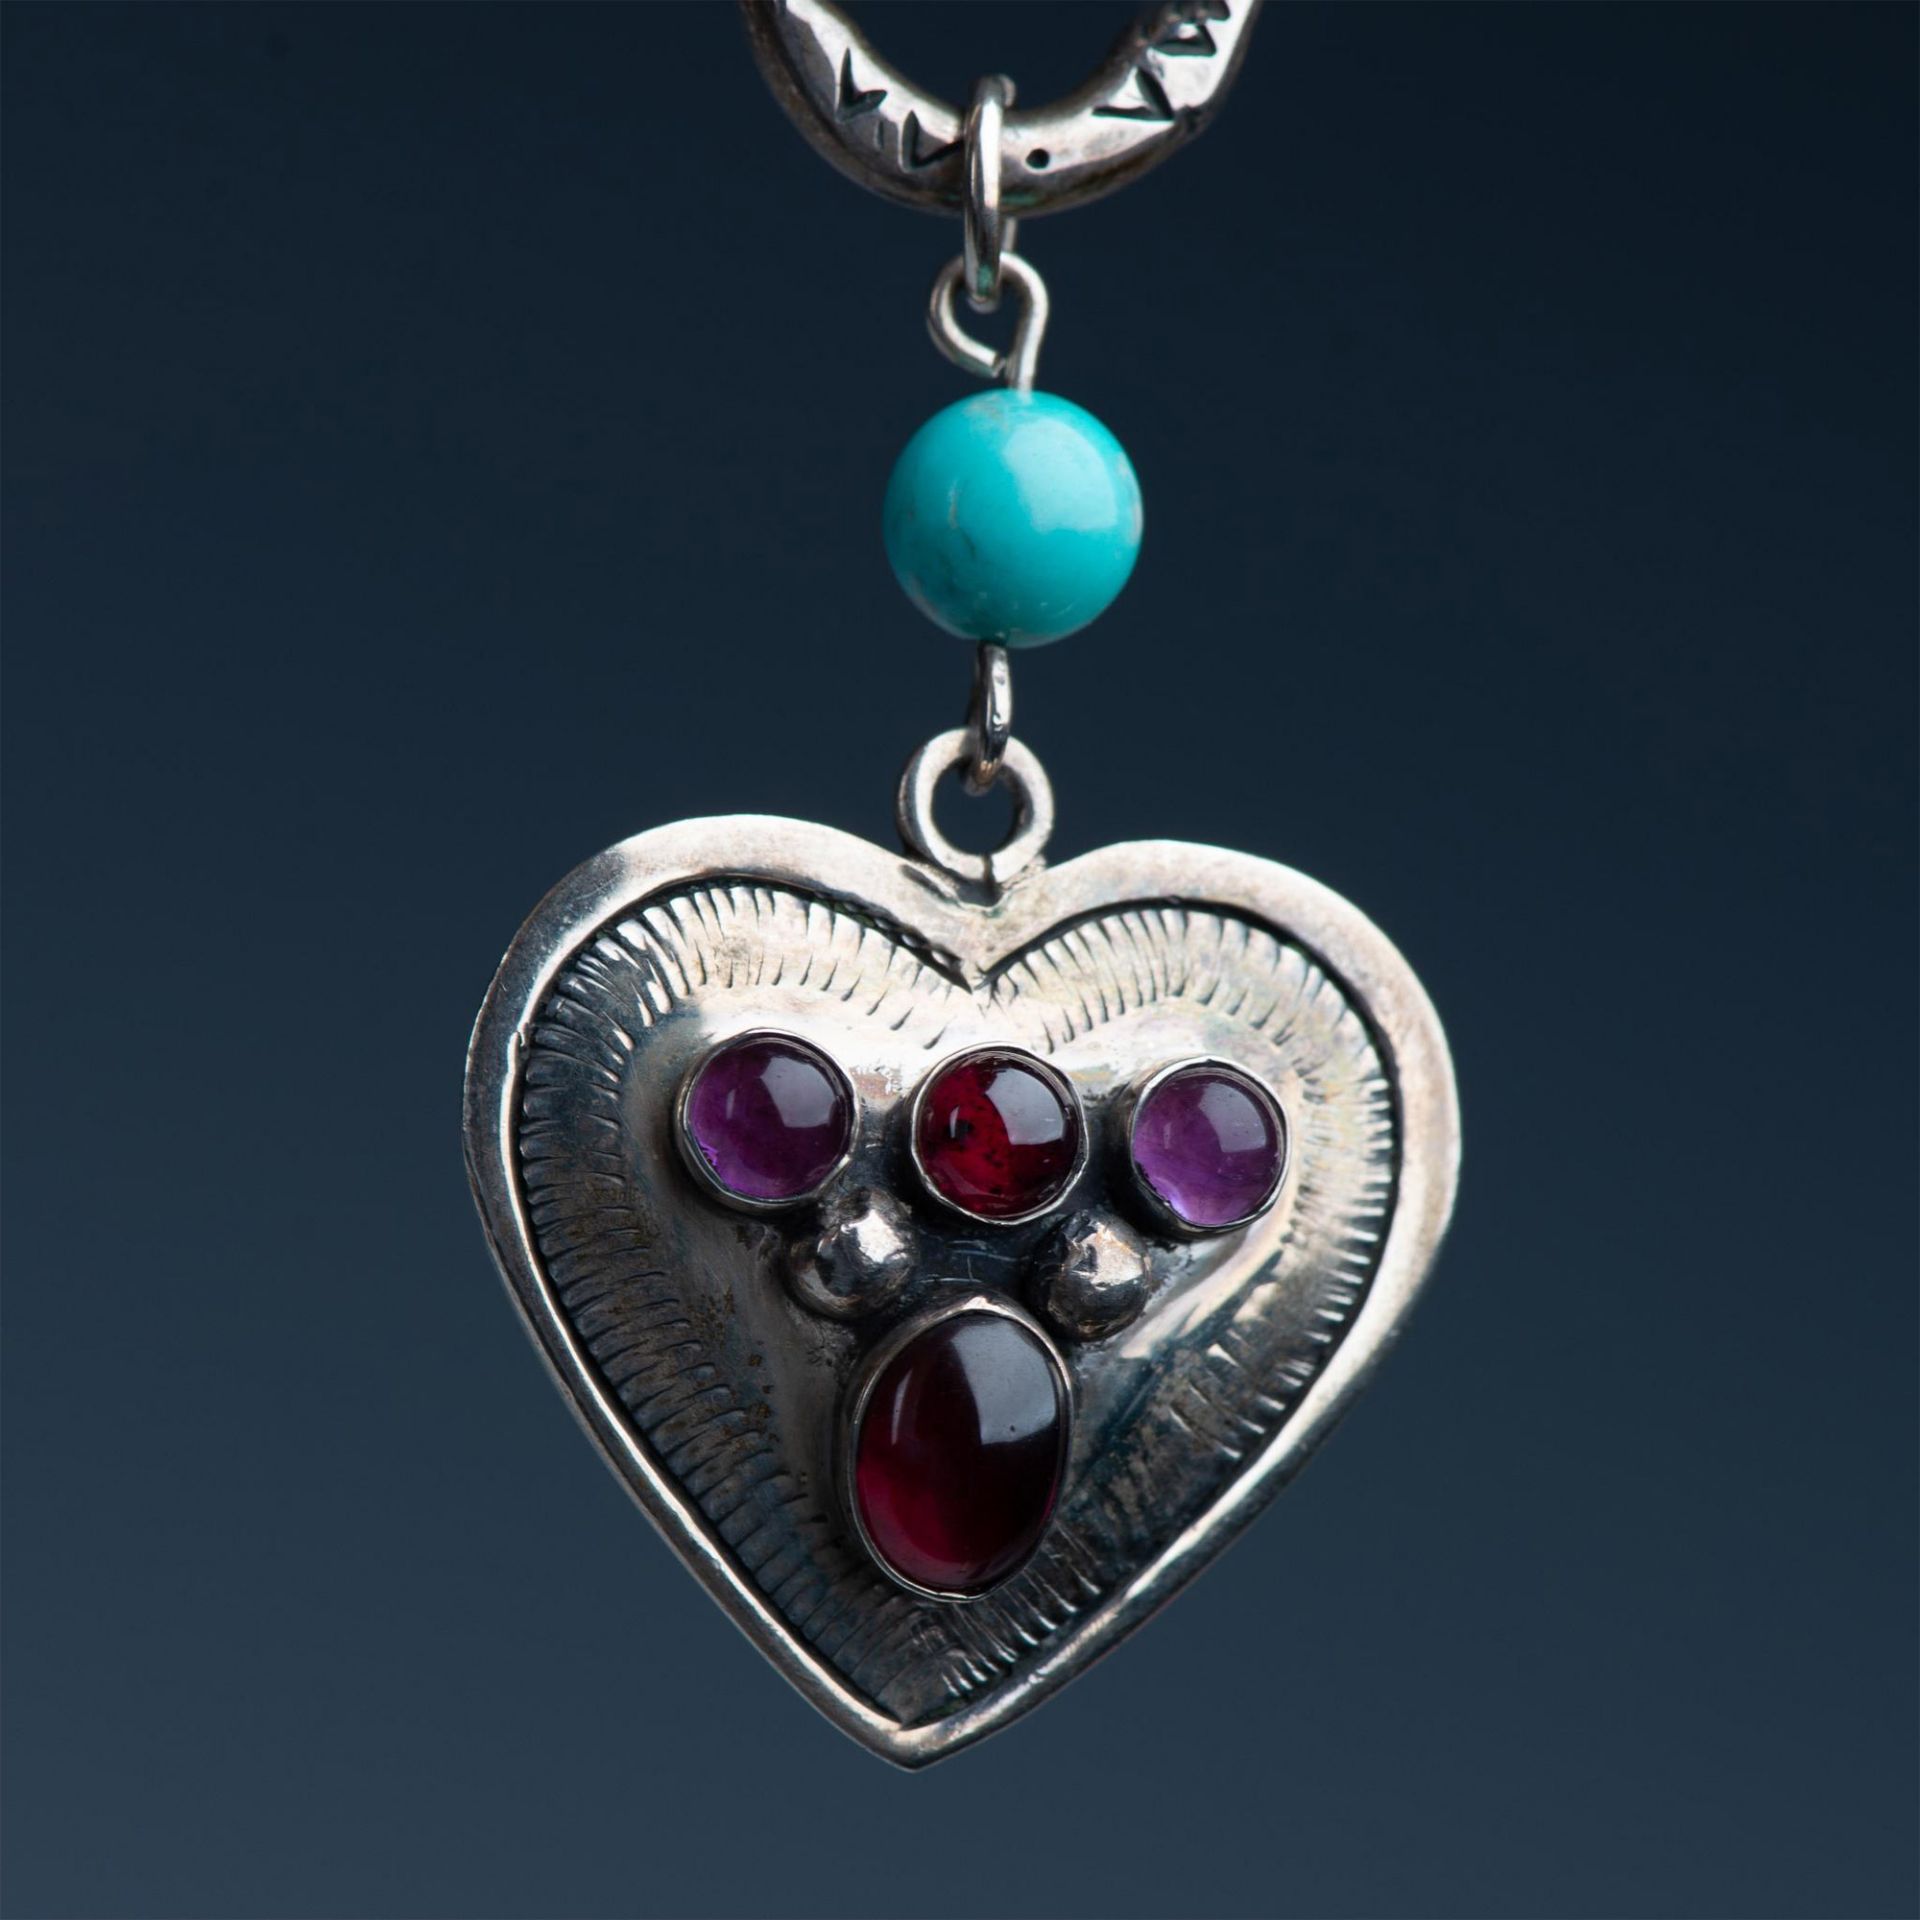 Pretty Sterling Silver Multi-Gemstone Heart Necklace - Image 3 of 4